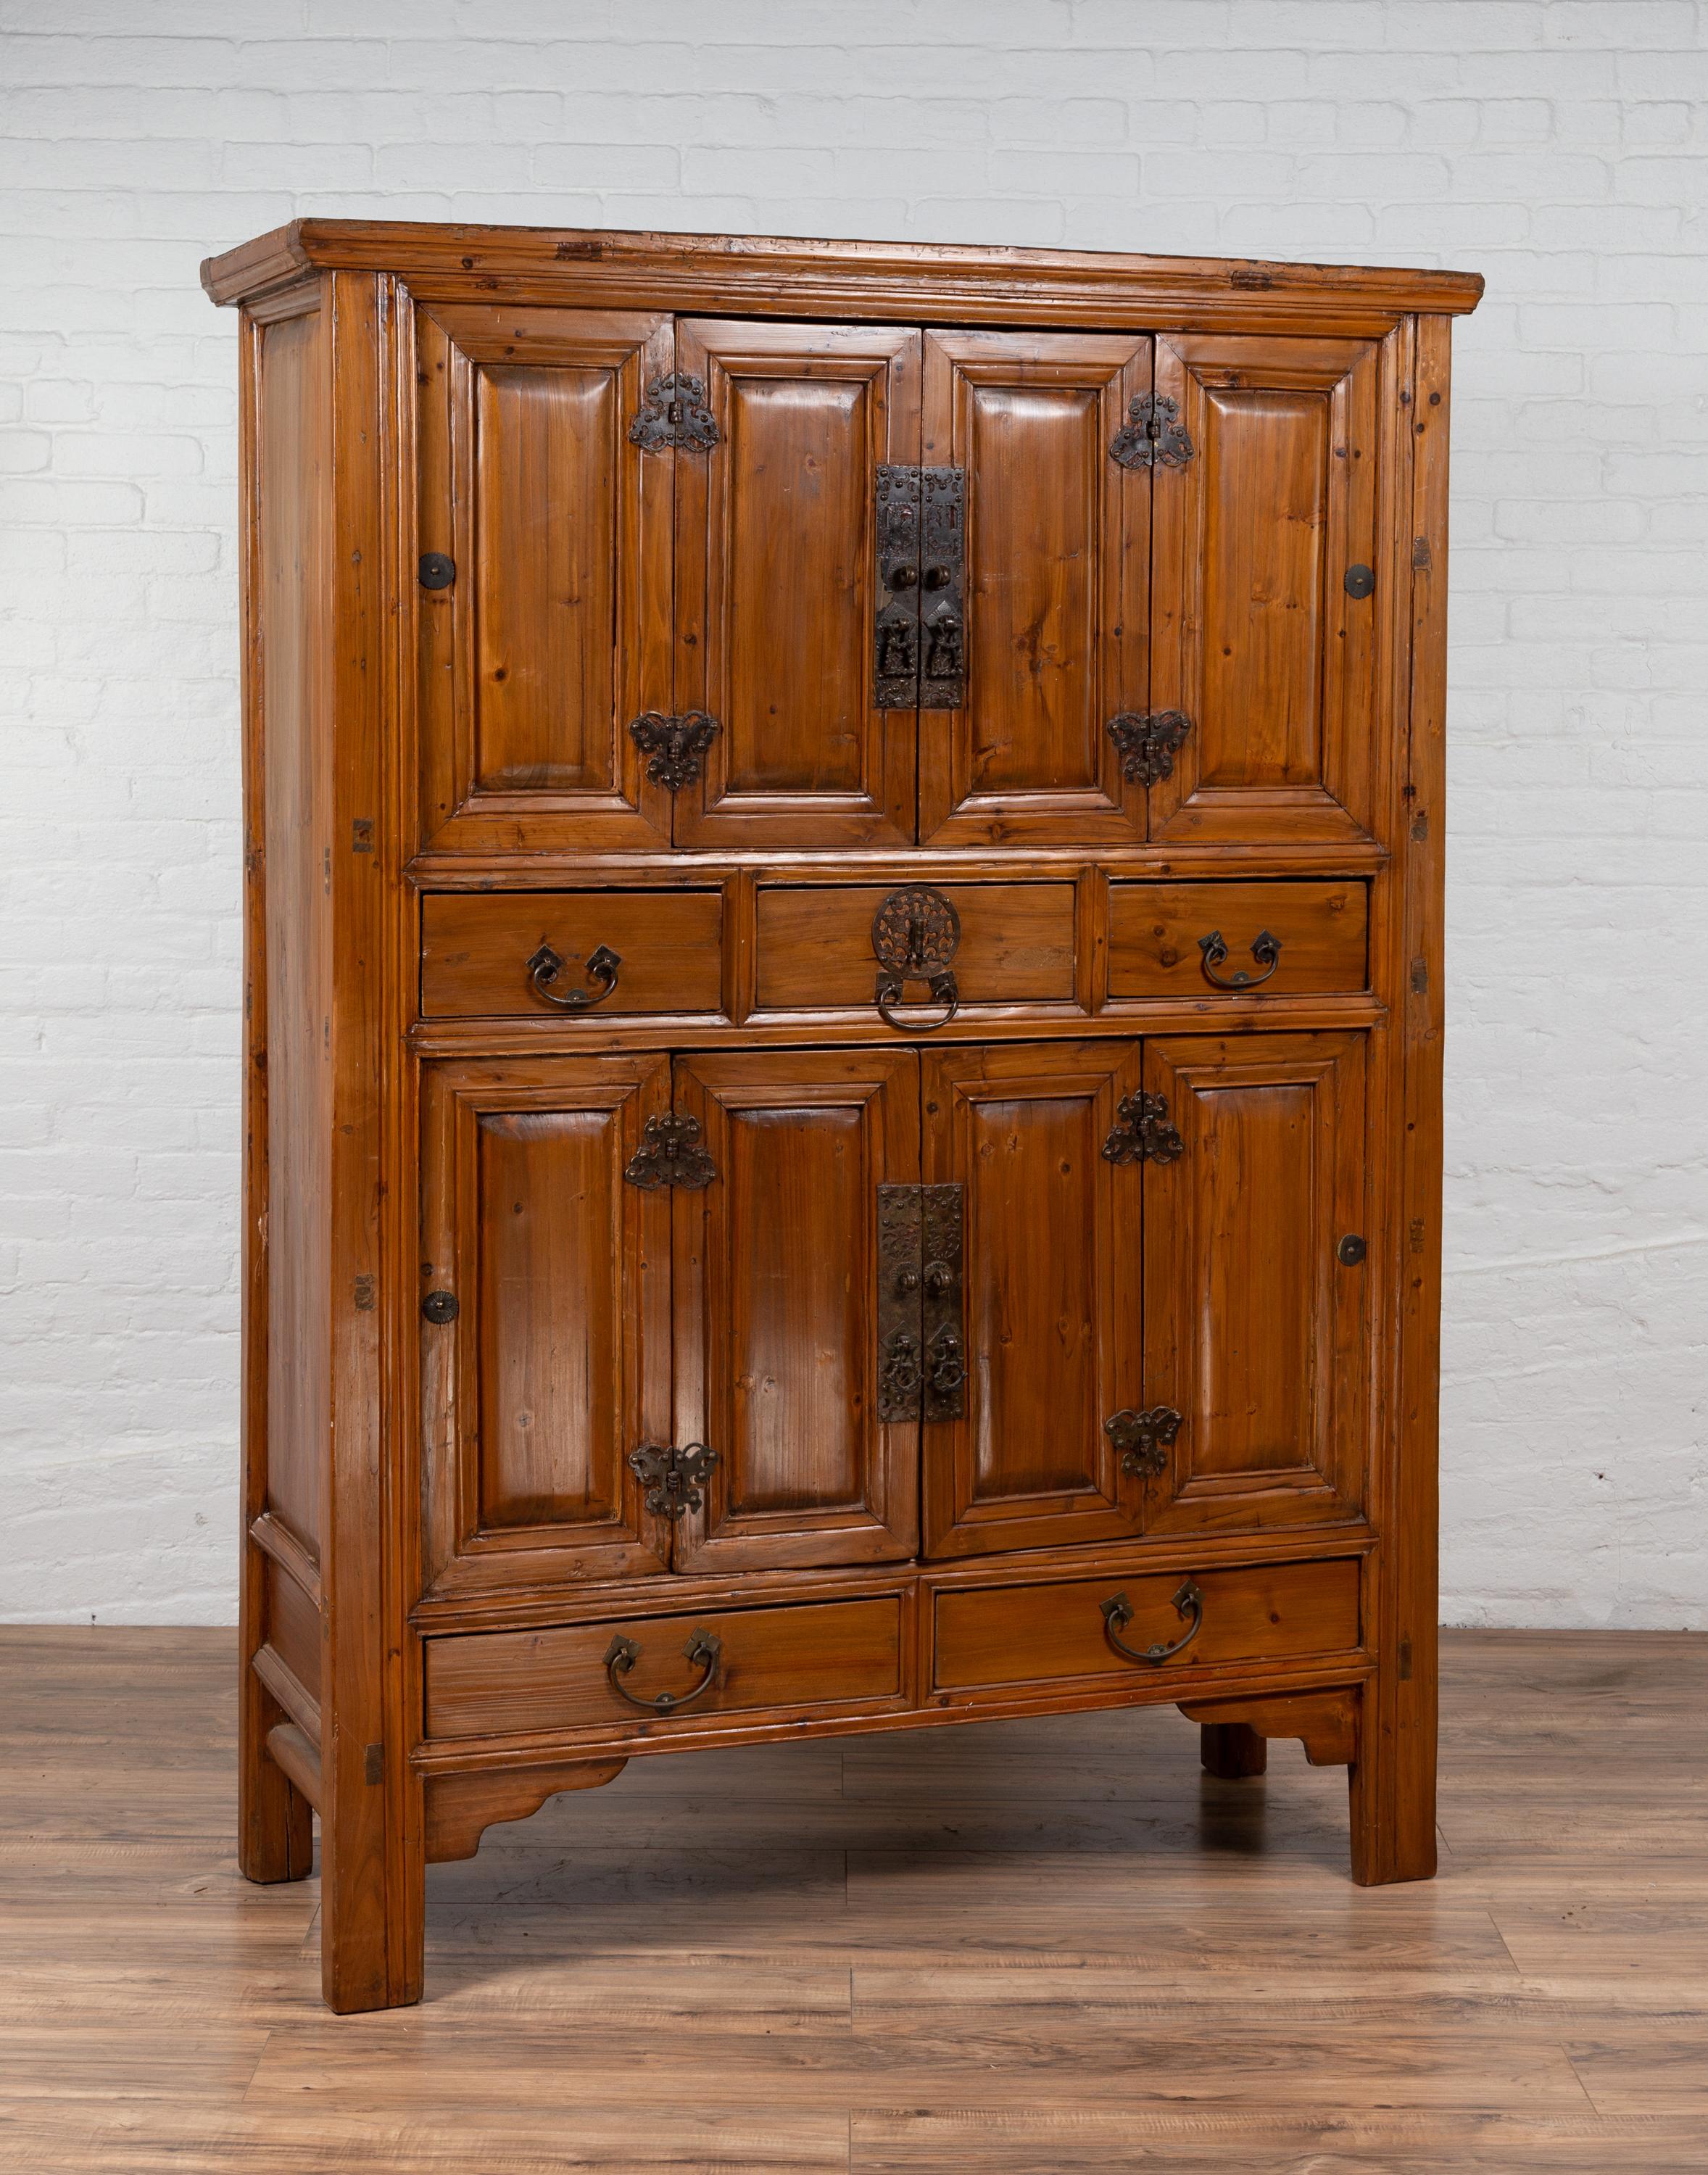 Large Chinese Qing Dynasty Style Wooden Cabinet with Paneled Doors and Drawers For Sale 9